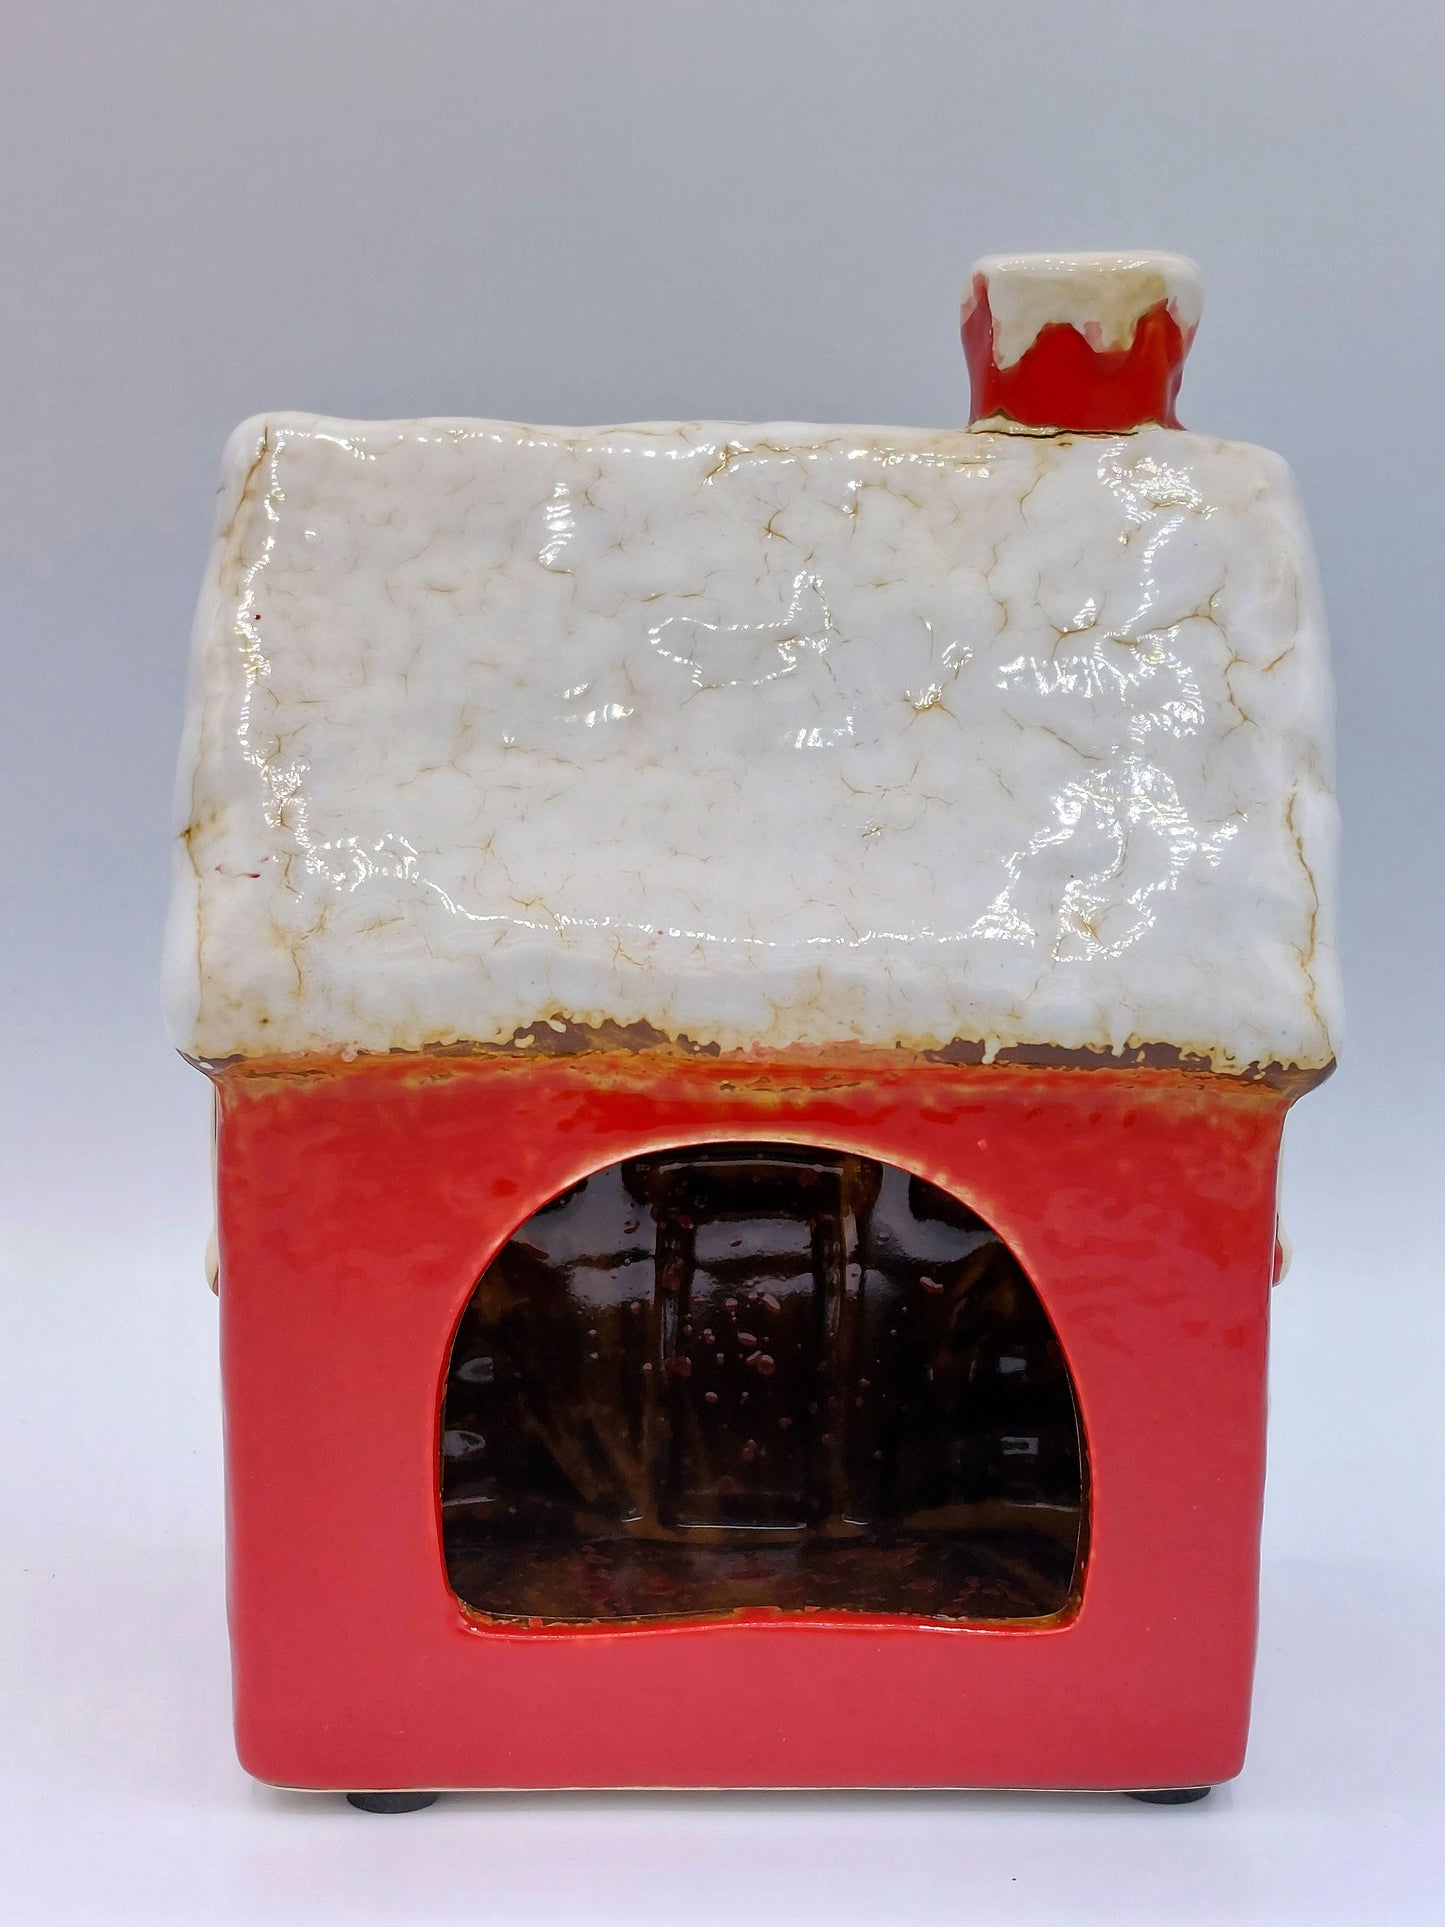 Little Red Ceramic House With Trees and Wreath